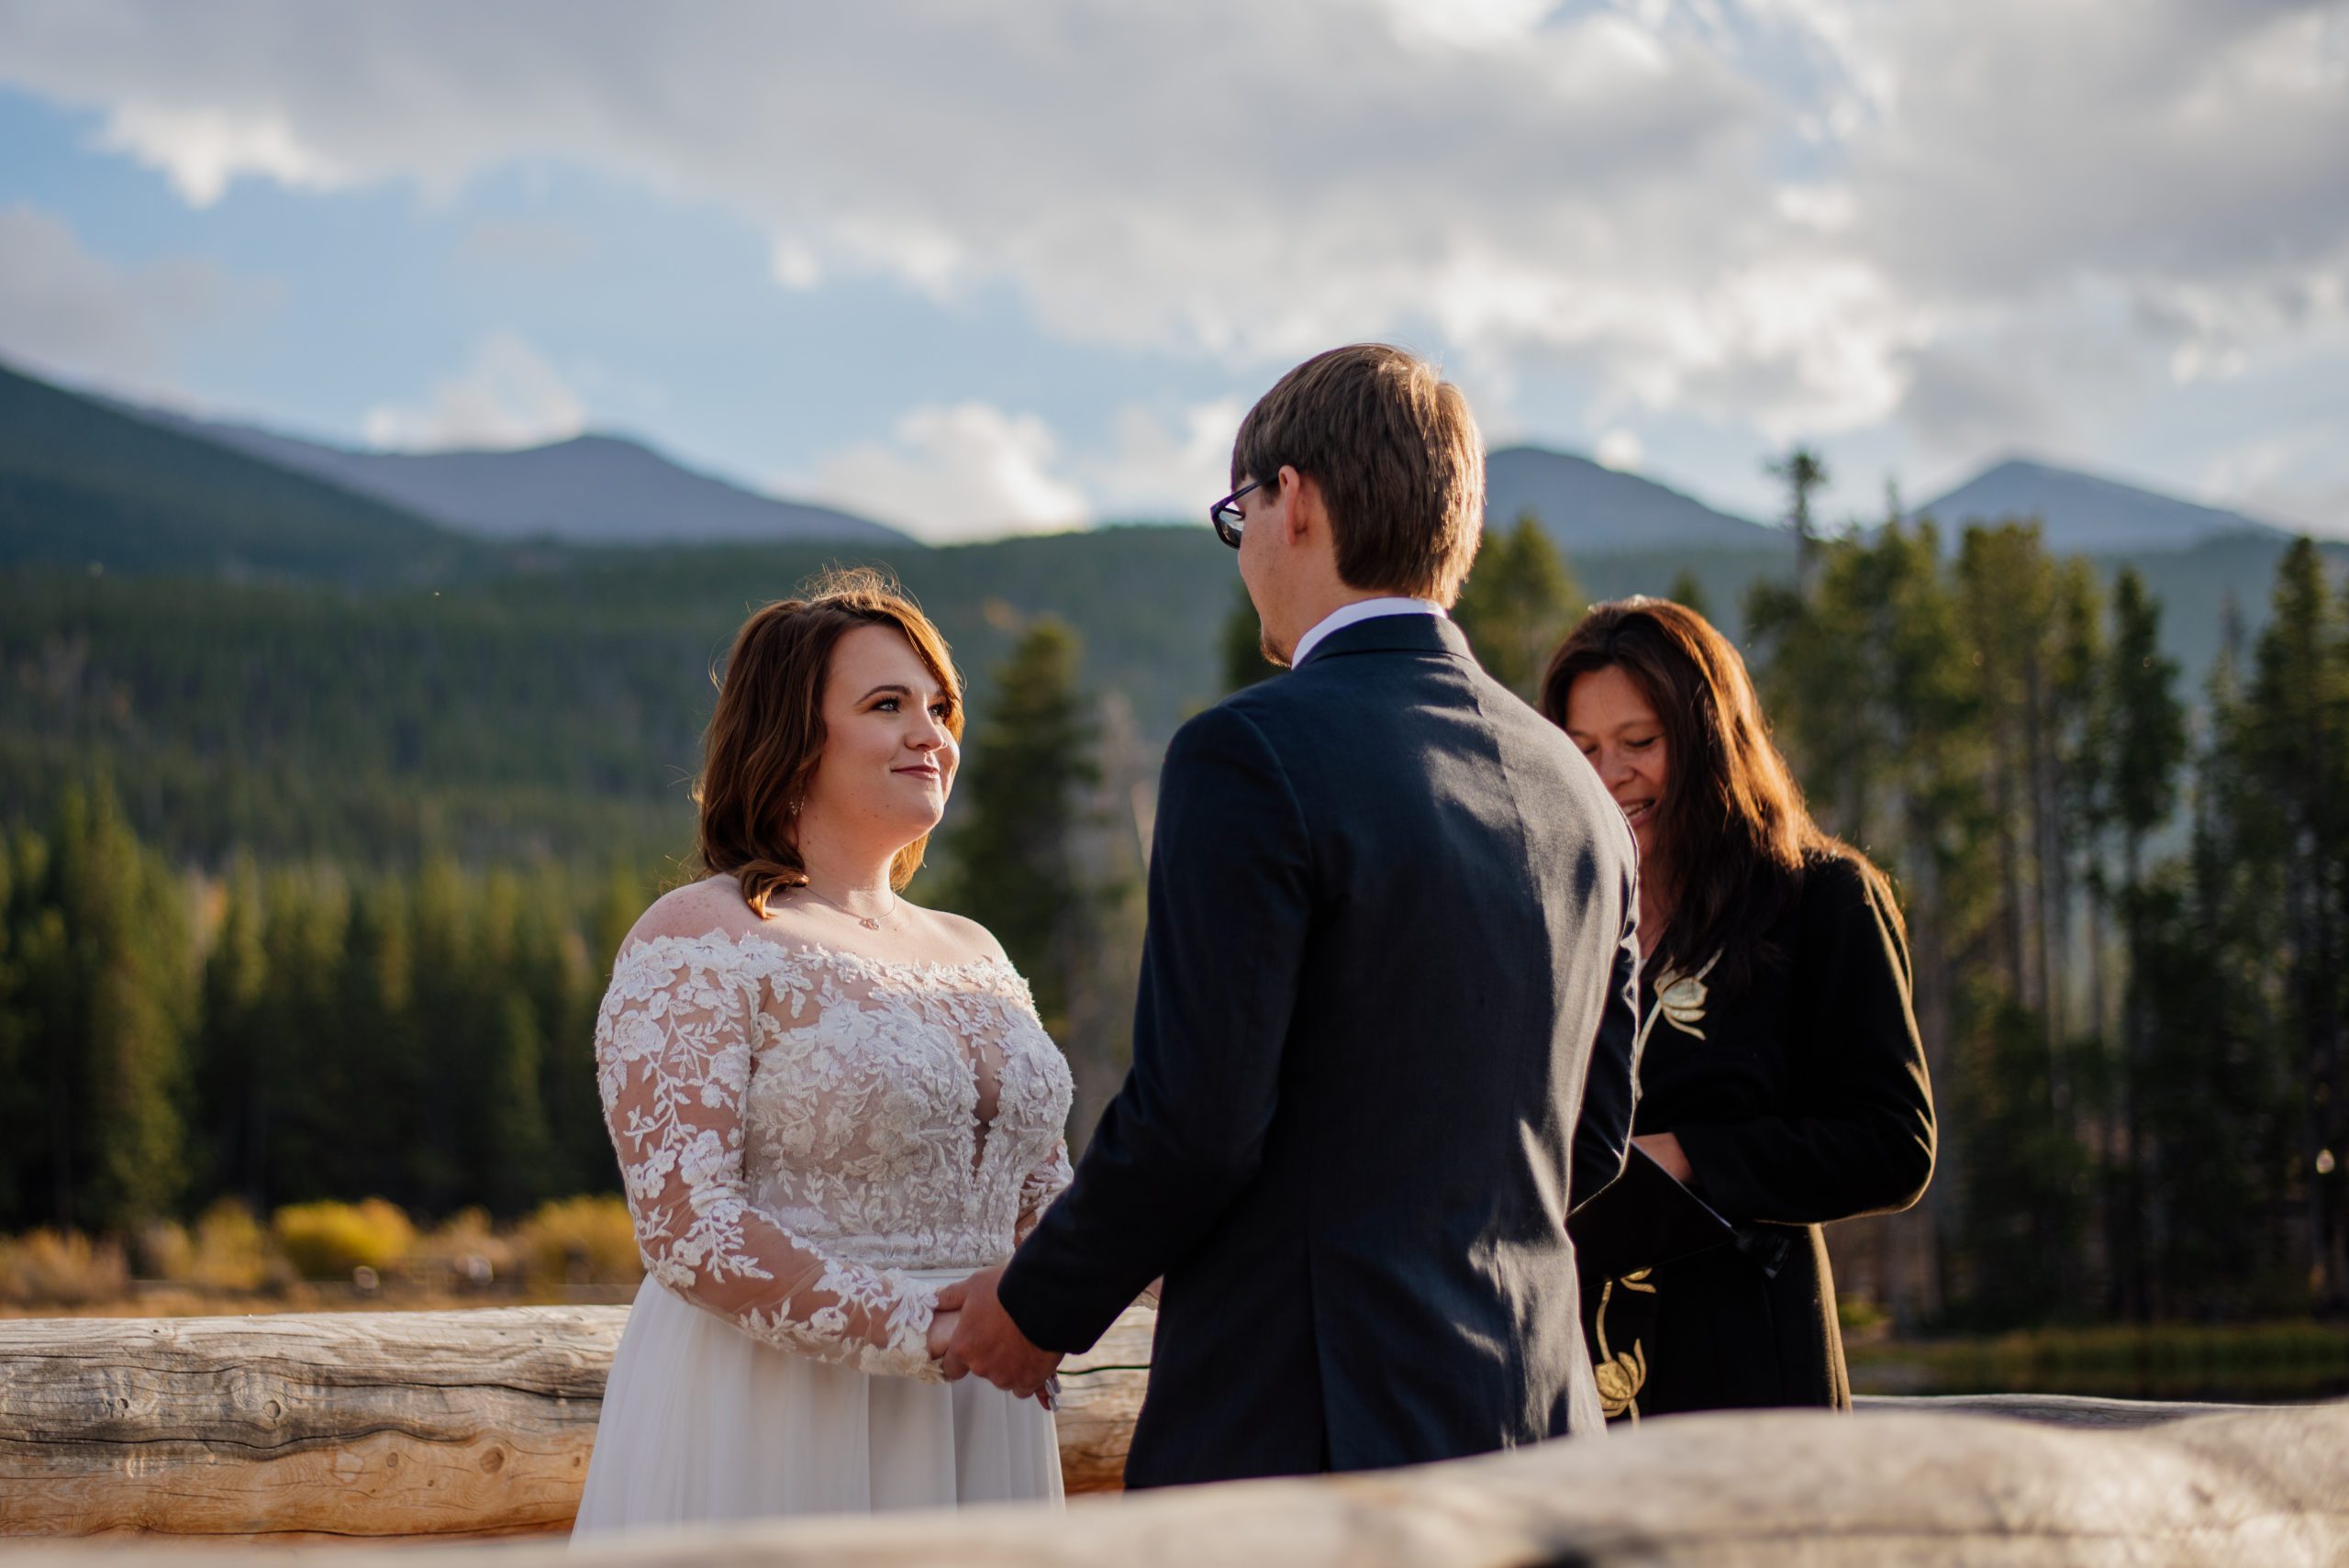 Bride looks at her groom with a smile during elopement ceremony at Sprague Lake - RMNP